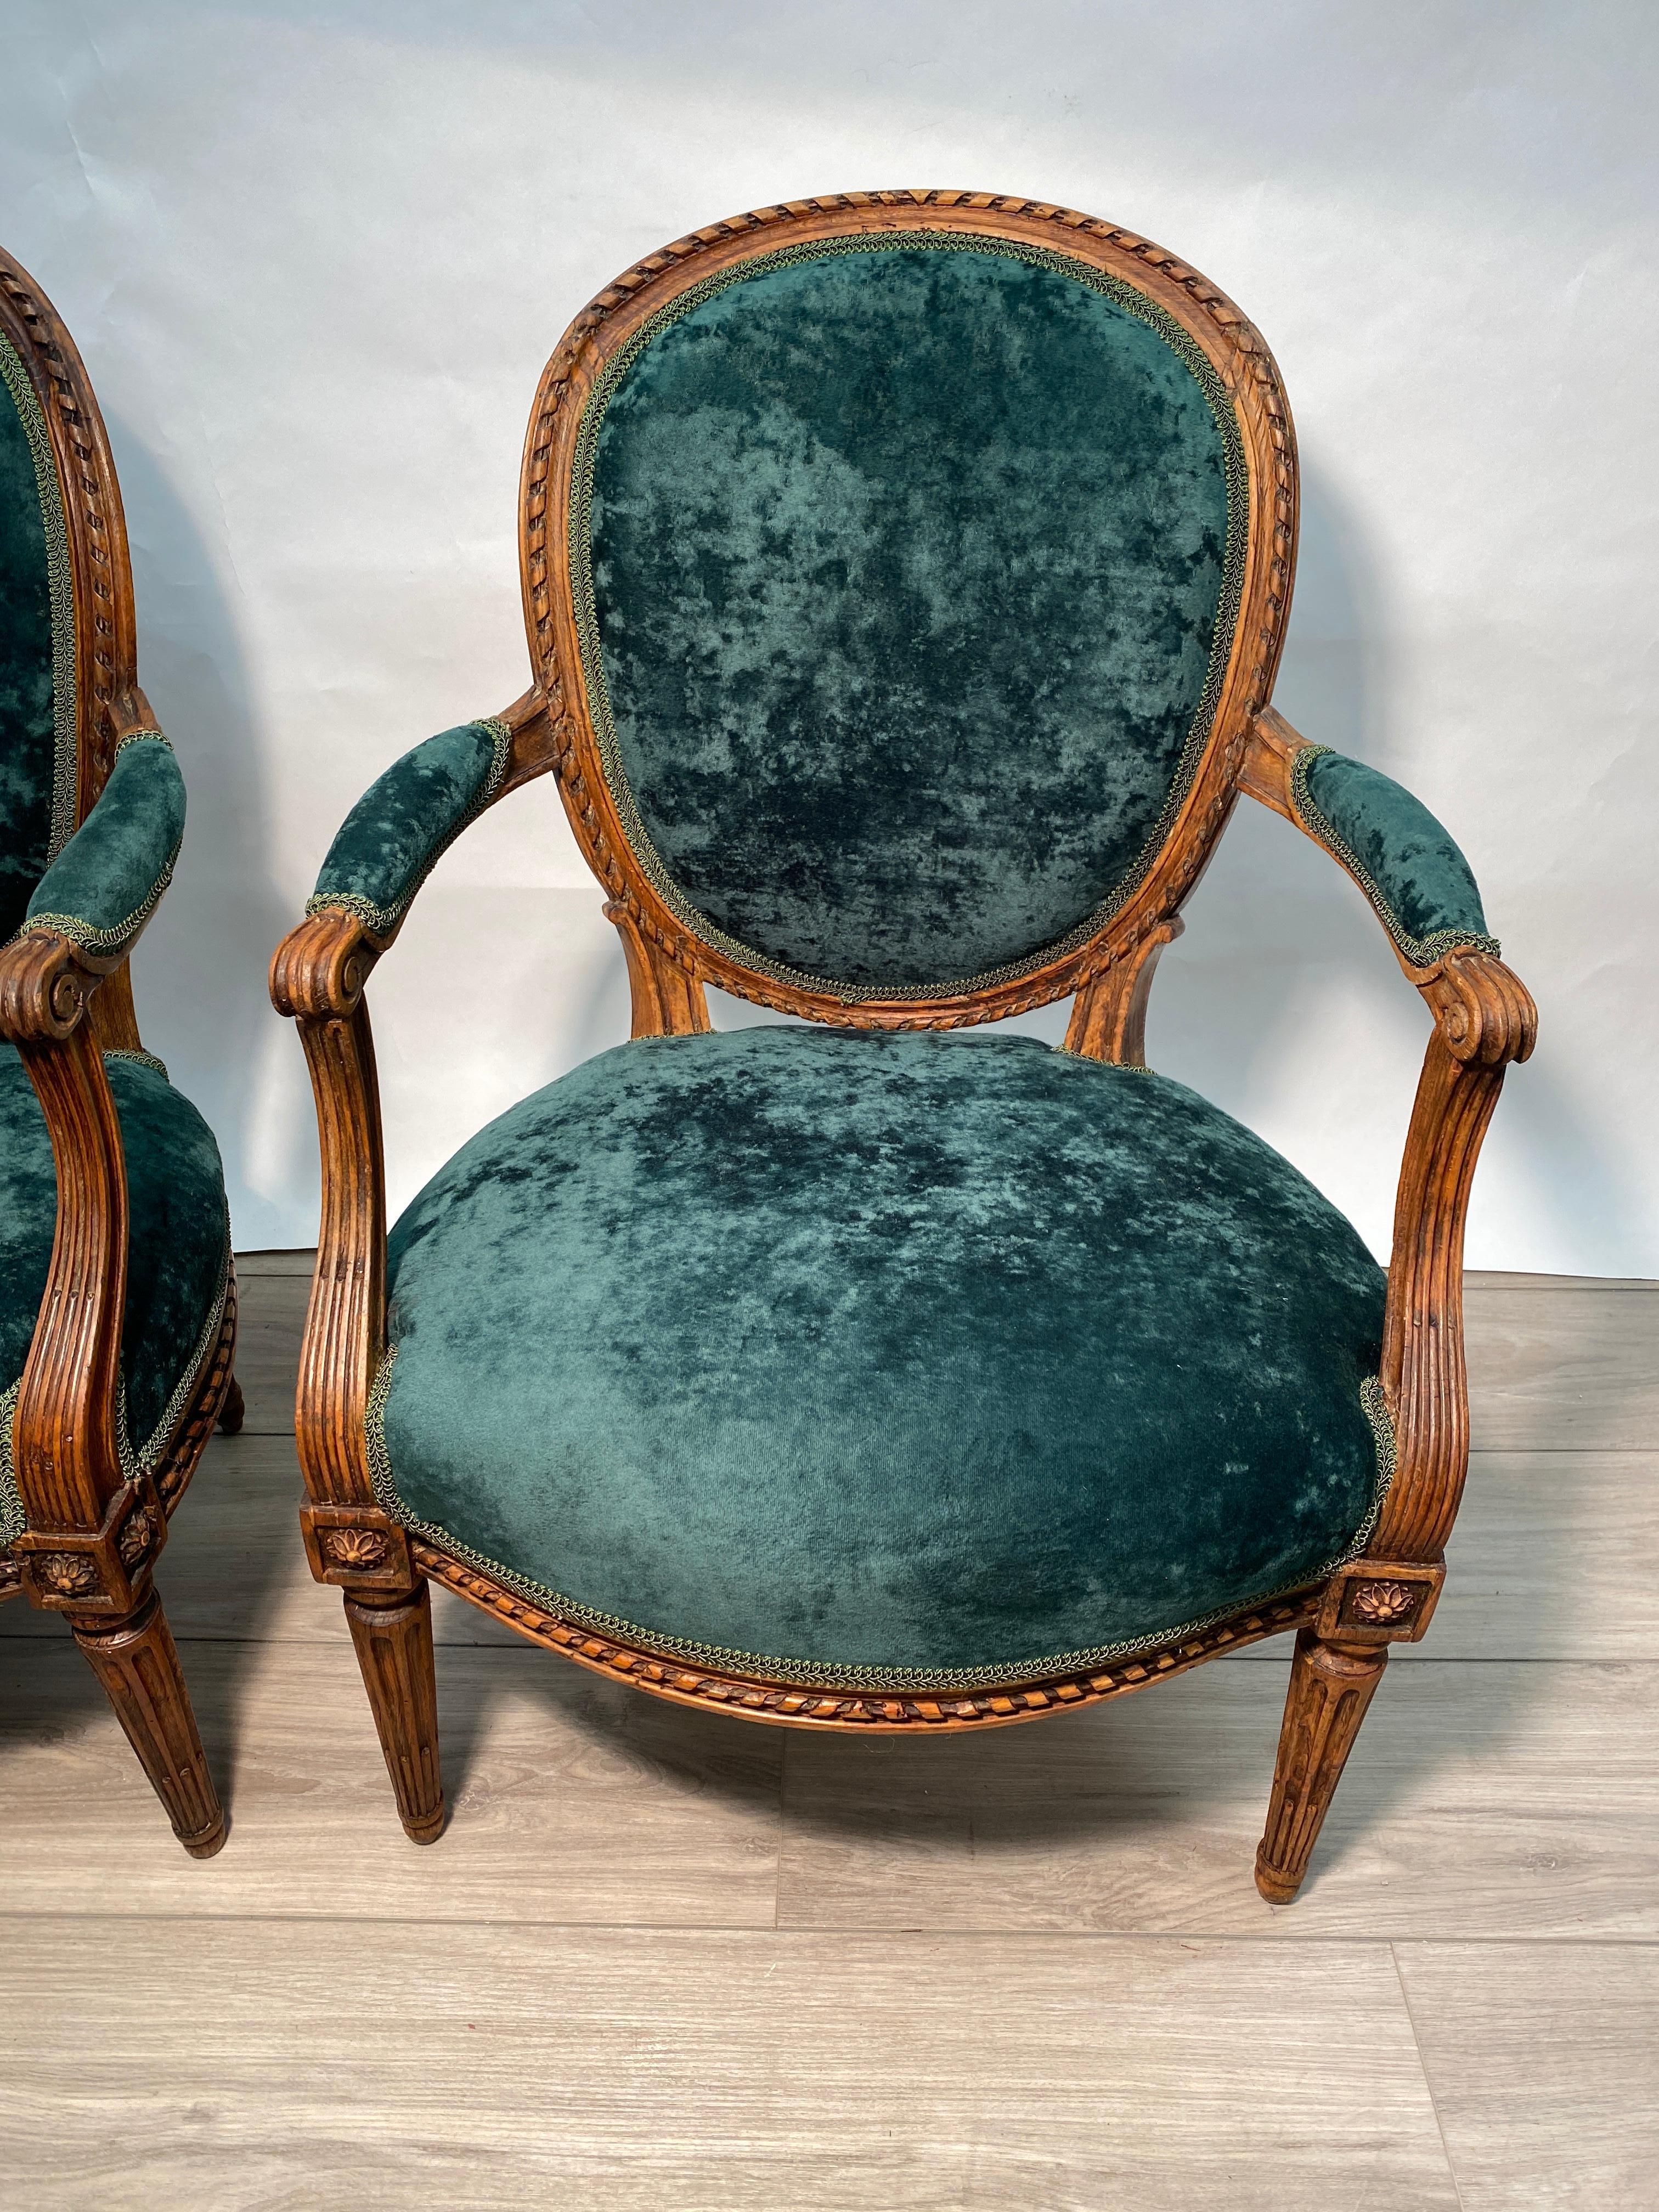 This is a rare pair of period Louis XVI fauteuil arm chairs in solid walnut. Recently upholstered in crushed emerald green fabric. Recently waxed finish and re-upholstered. 

Measures: 34.5